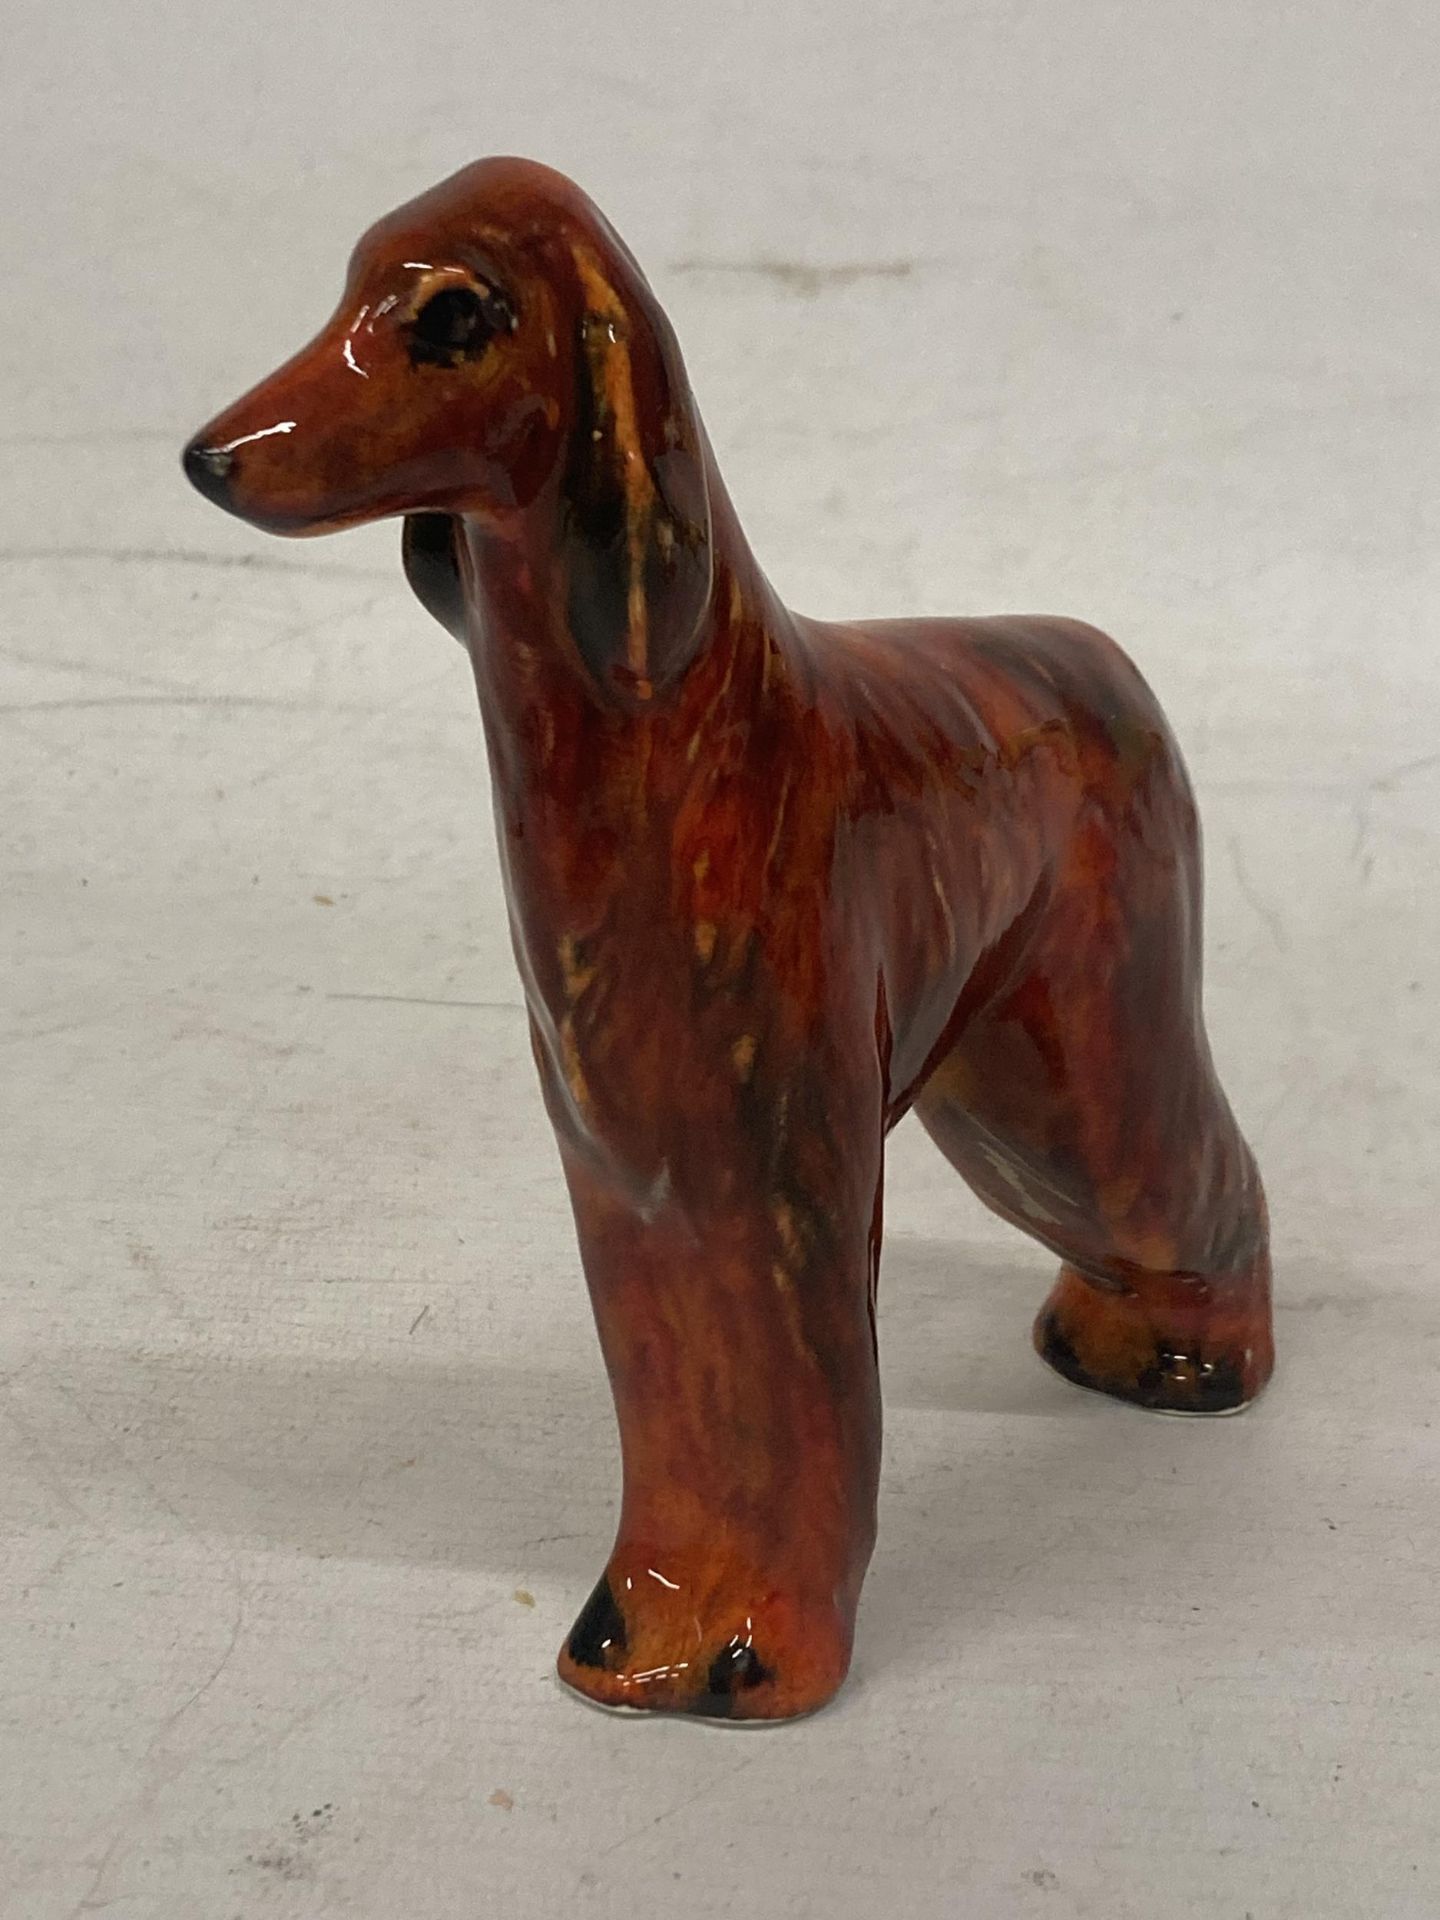 AN ANITA HARRIS AFGHAN HOUND SIGNED IN GOLD